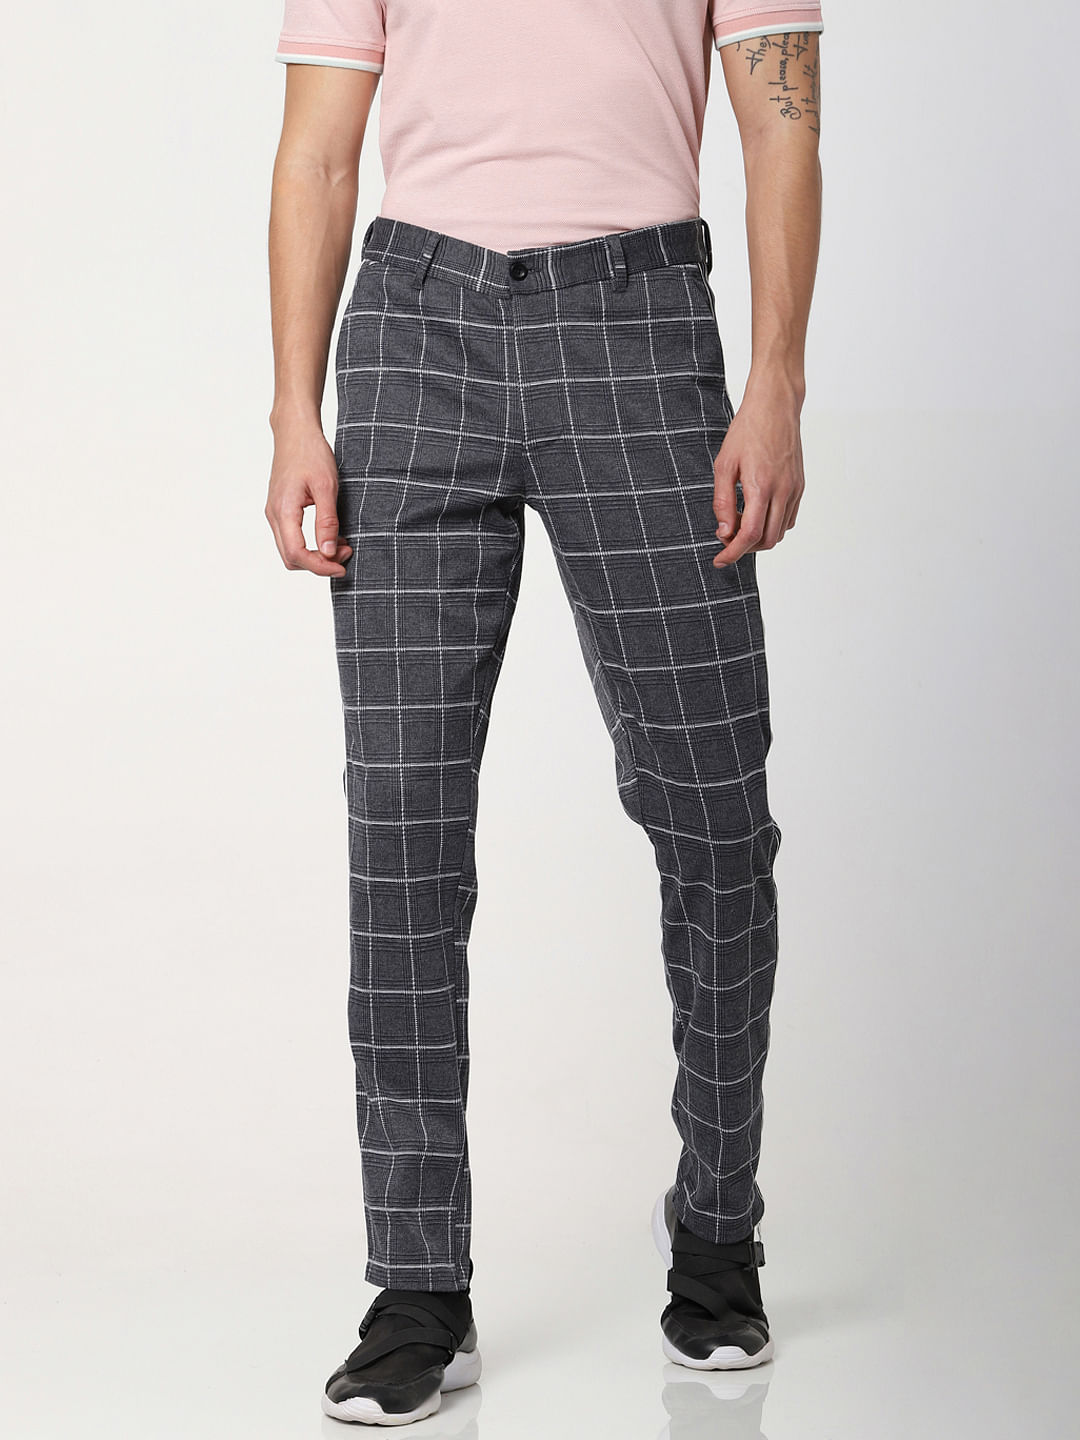 12 Best checkered pants outfit ideas  cute outfits fashion outfits  clothes